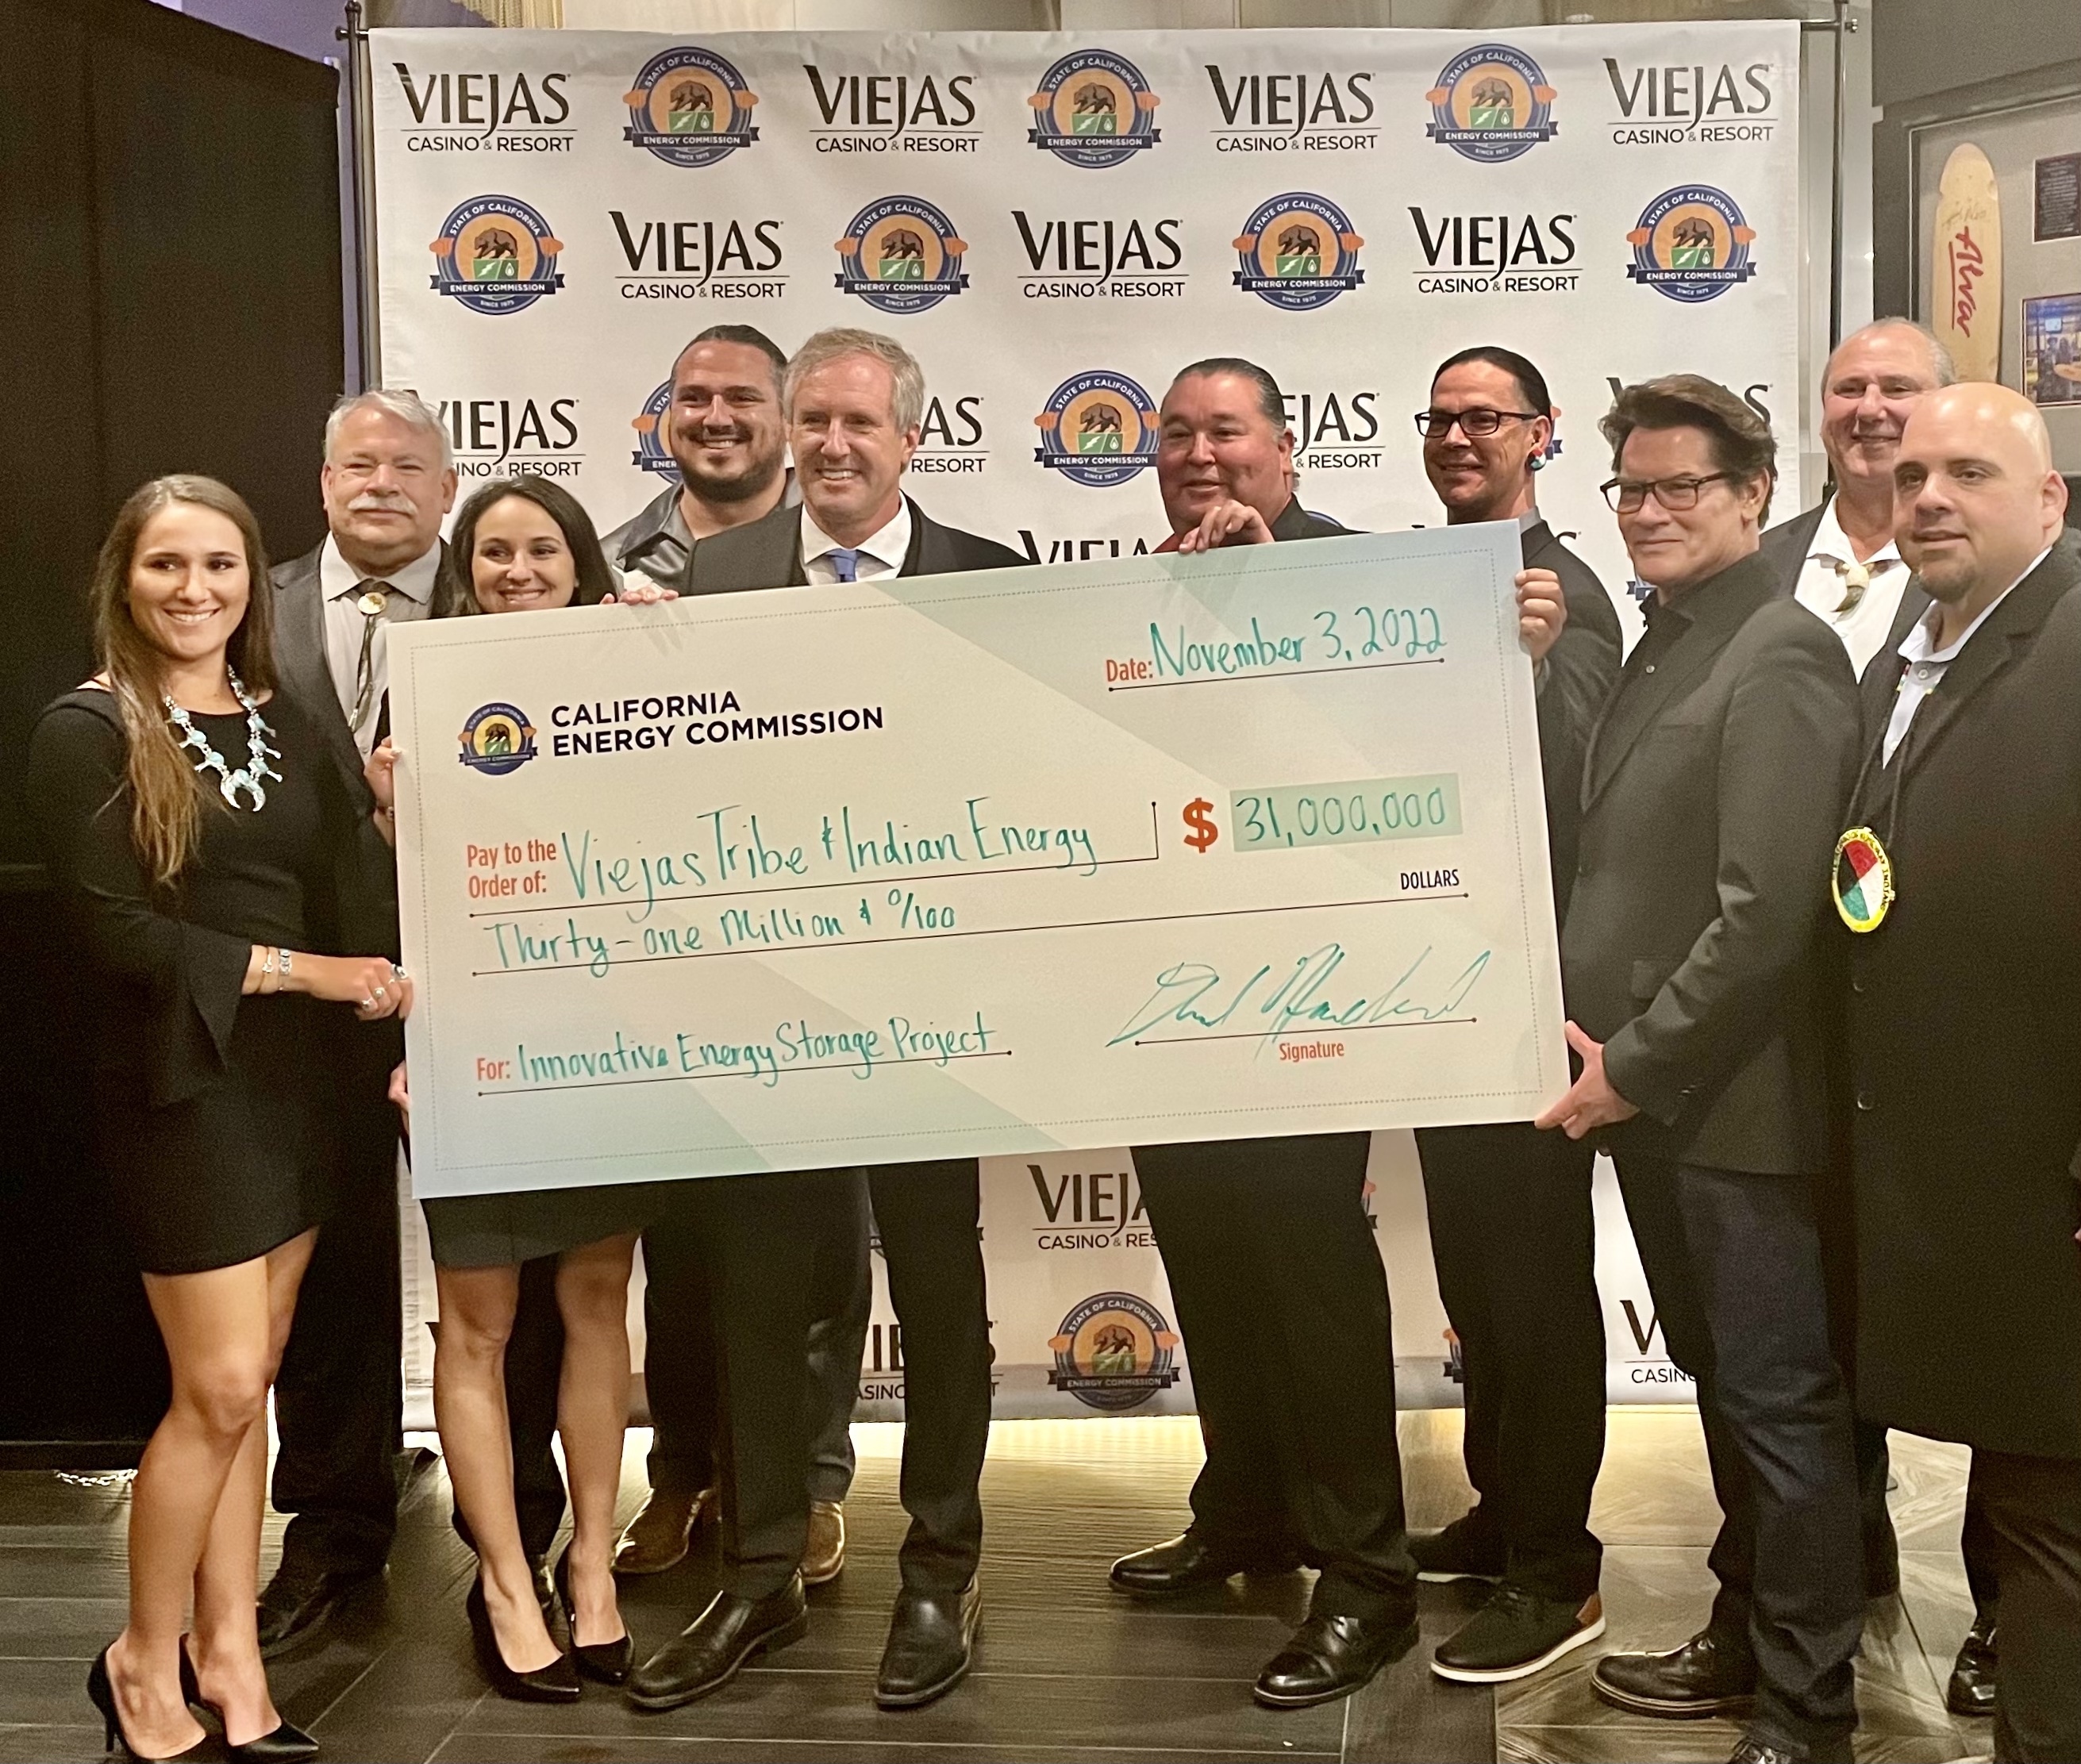 Image of Chair David Hochschild, Viejas Tribal officials and Indian Energy representatives holding an oversized check for $31 million for an innovative energy storage project.